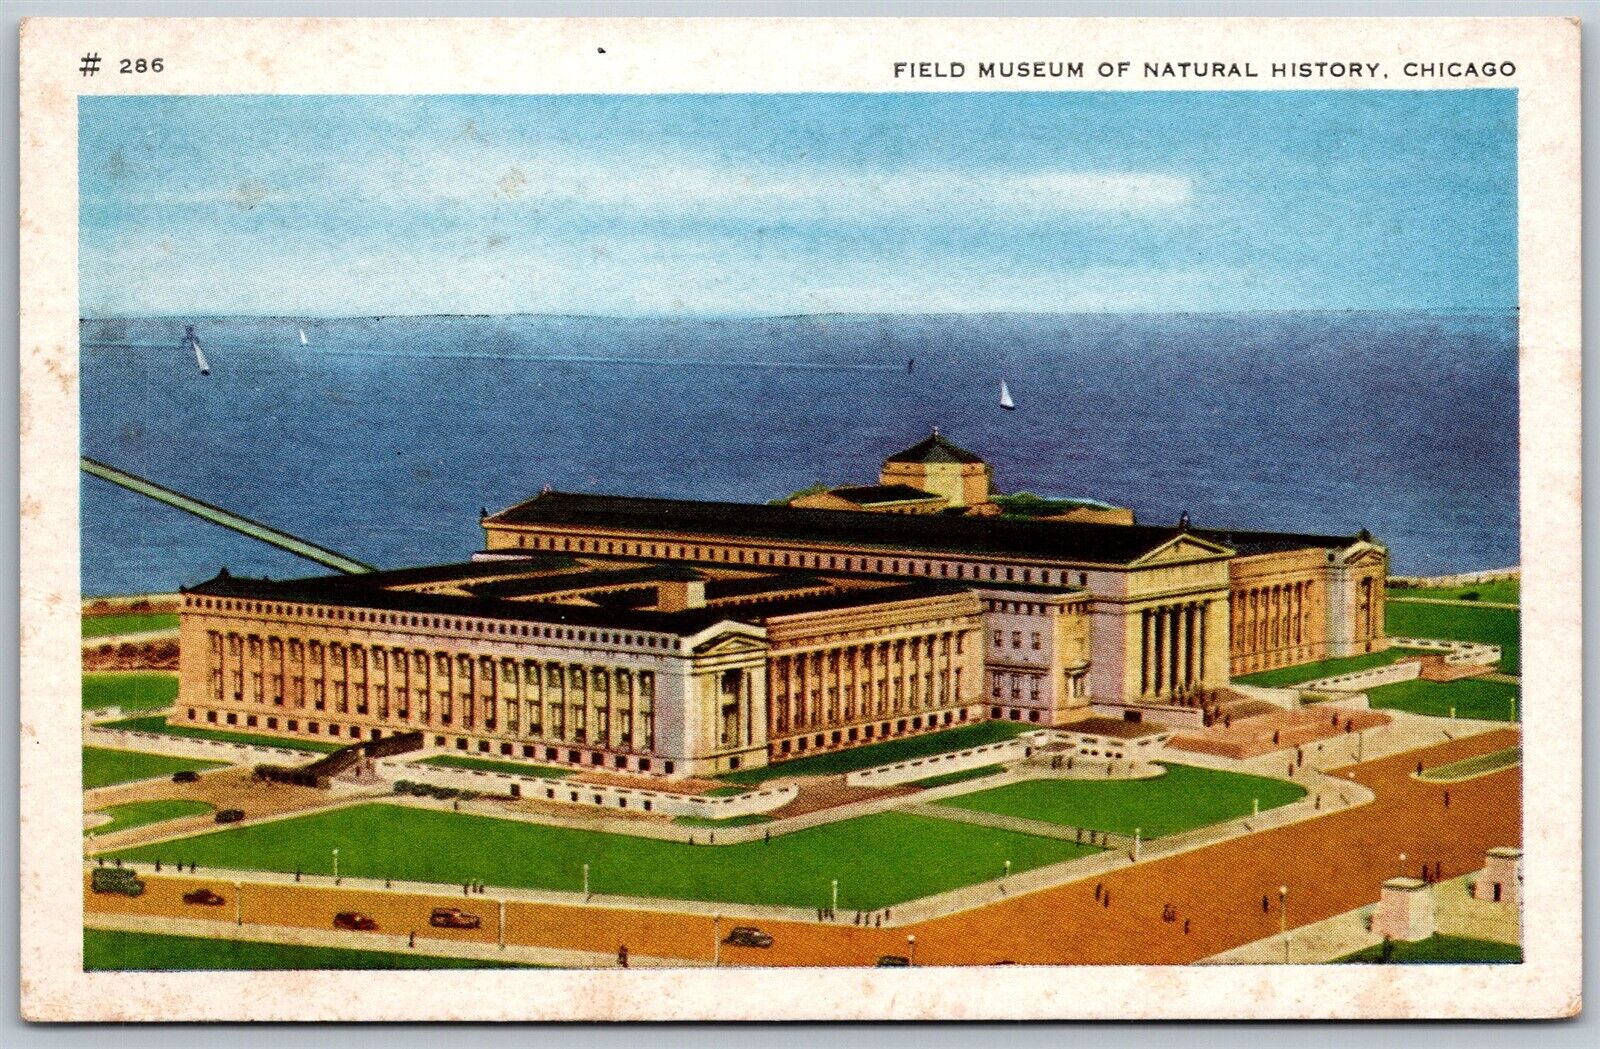 Vtg Chicago Illinois IL Field Museum of Natural History 1940s View Postcard